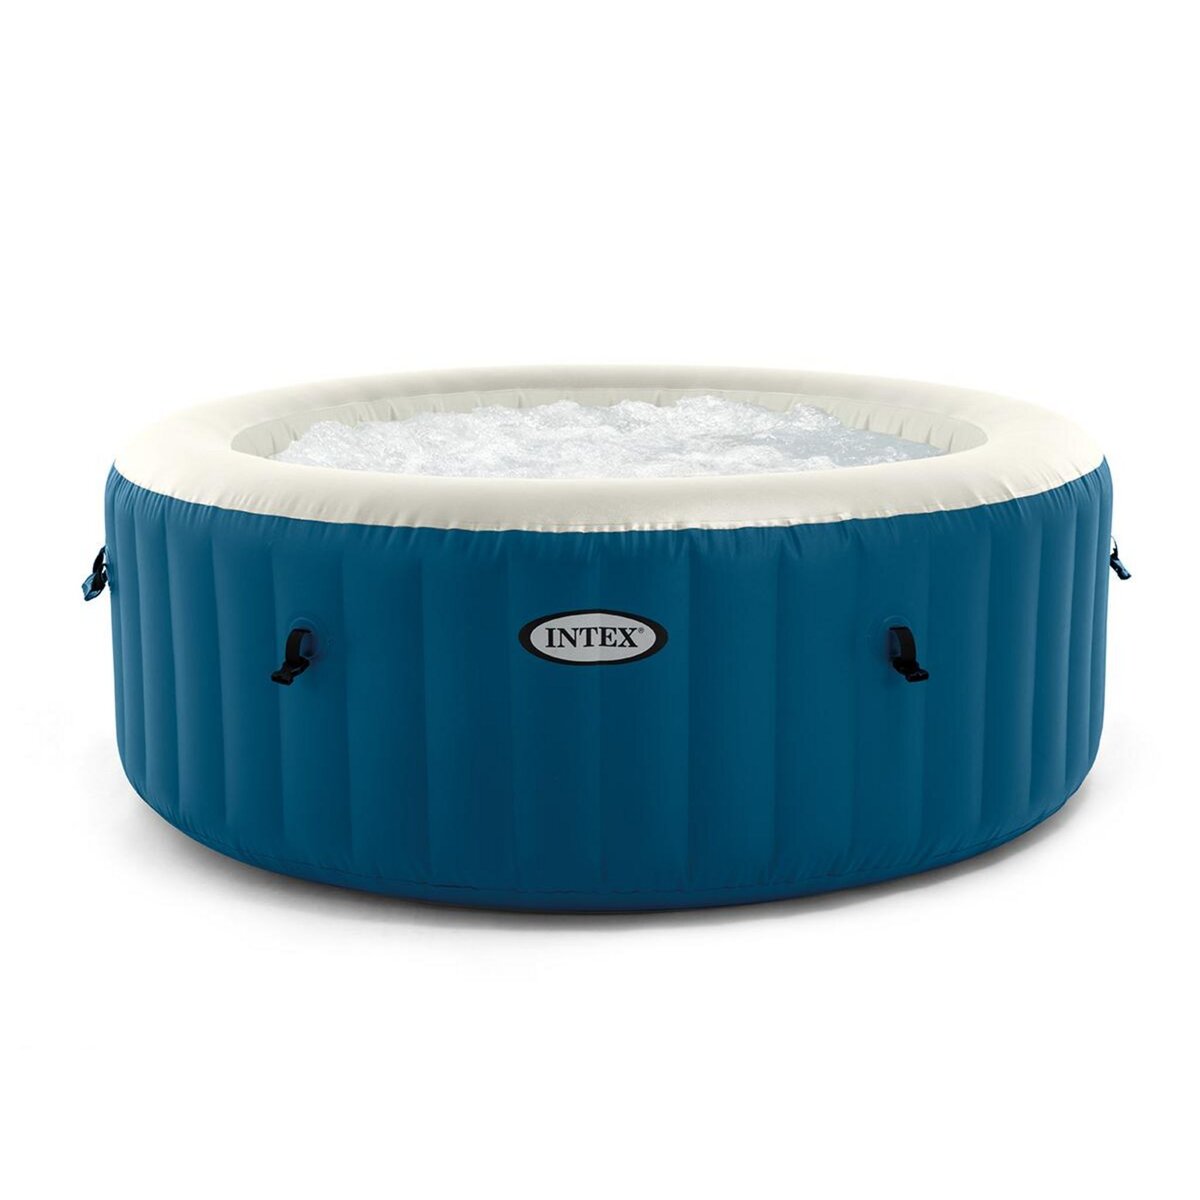 INTEX Spa gonflable PureSpa Blue One rond Bulles 2/4 places - Intex